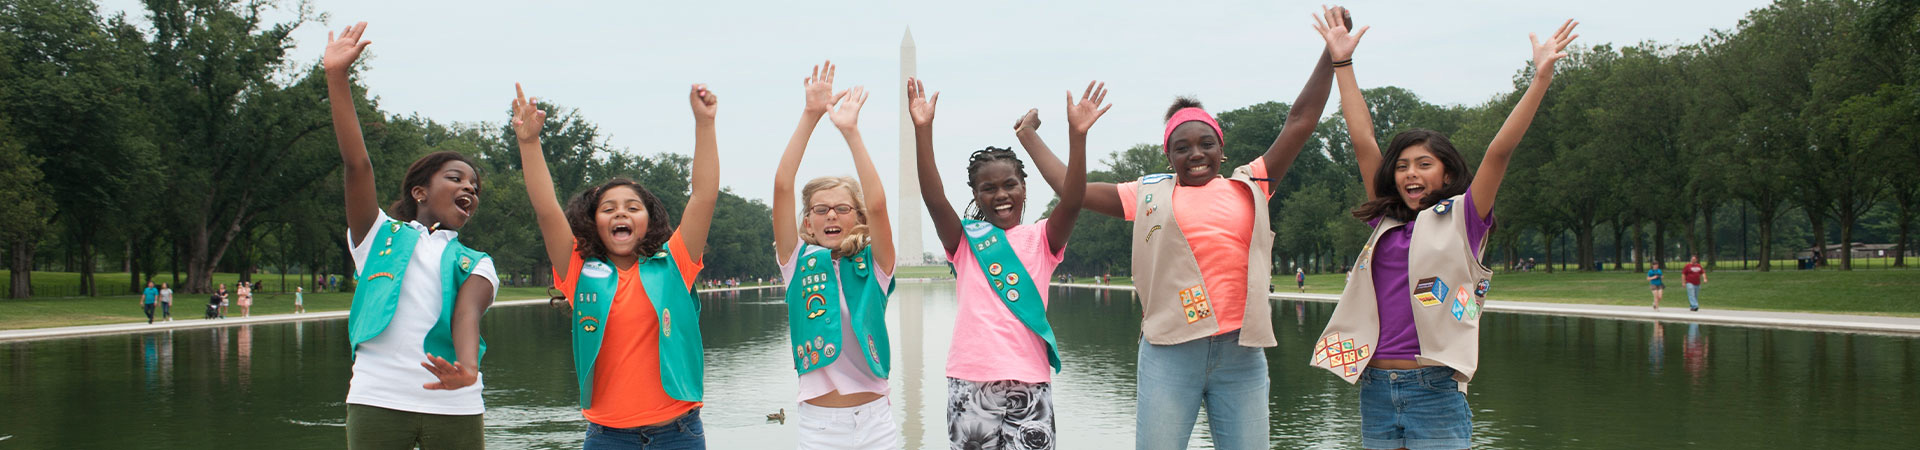  Girl Scouts in uniforms jumping with arms up in front of water 